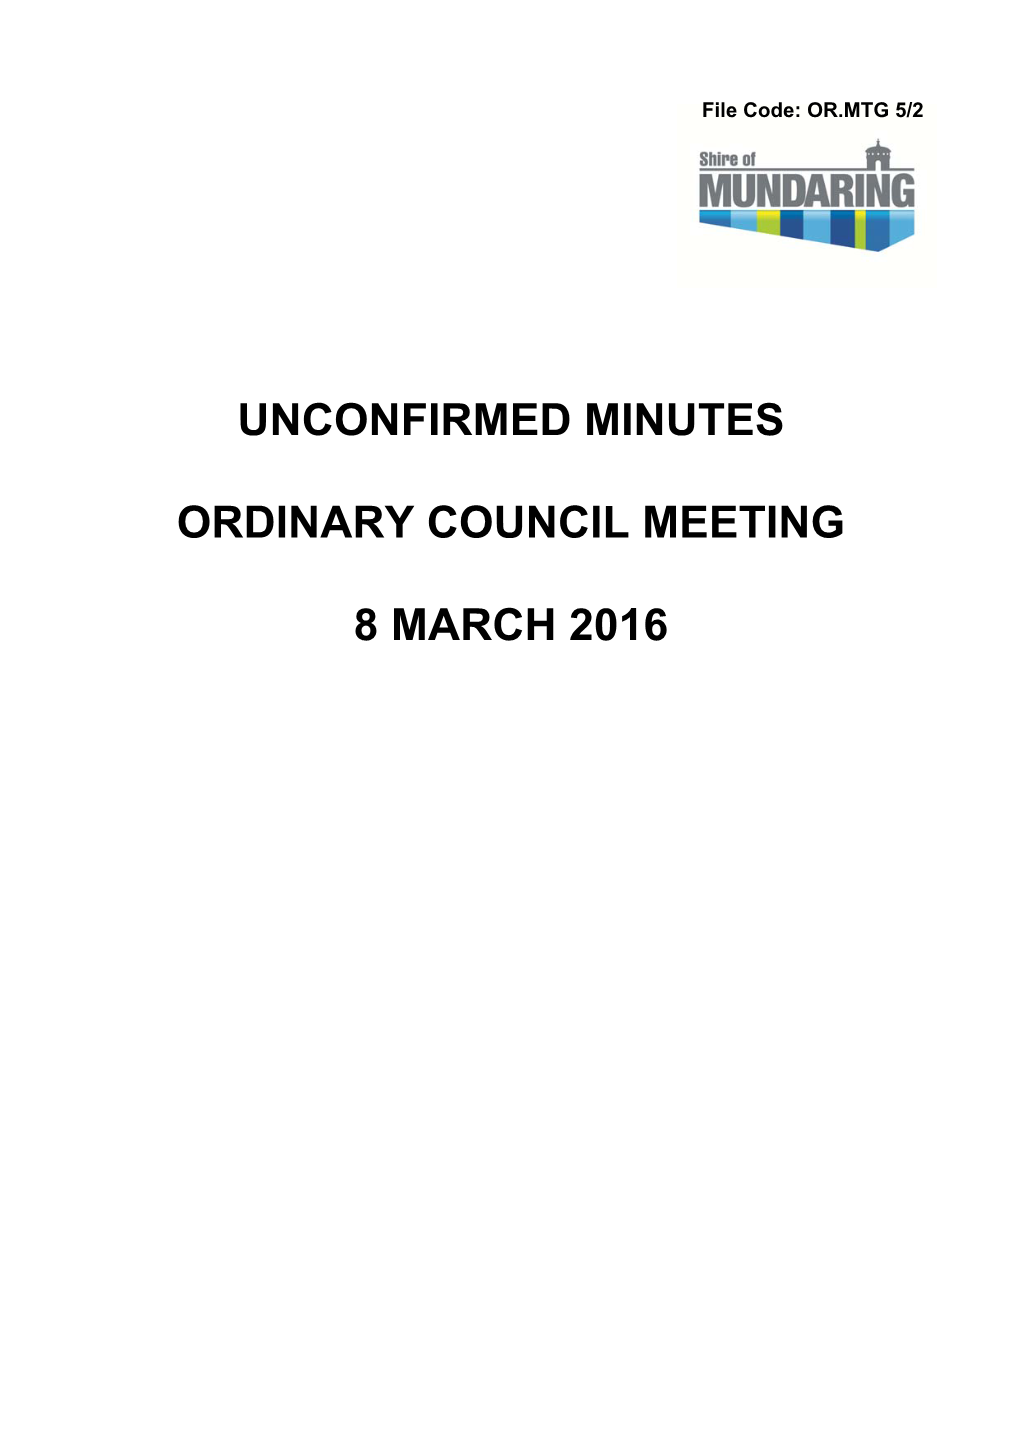 Ordinary Council Meeting 8 March 2016